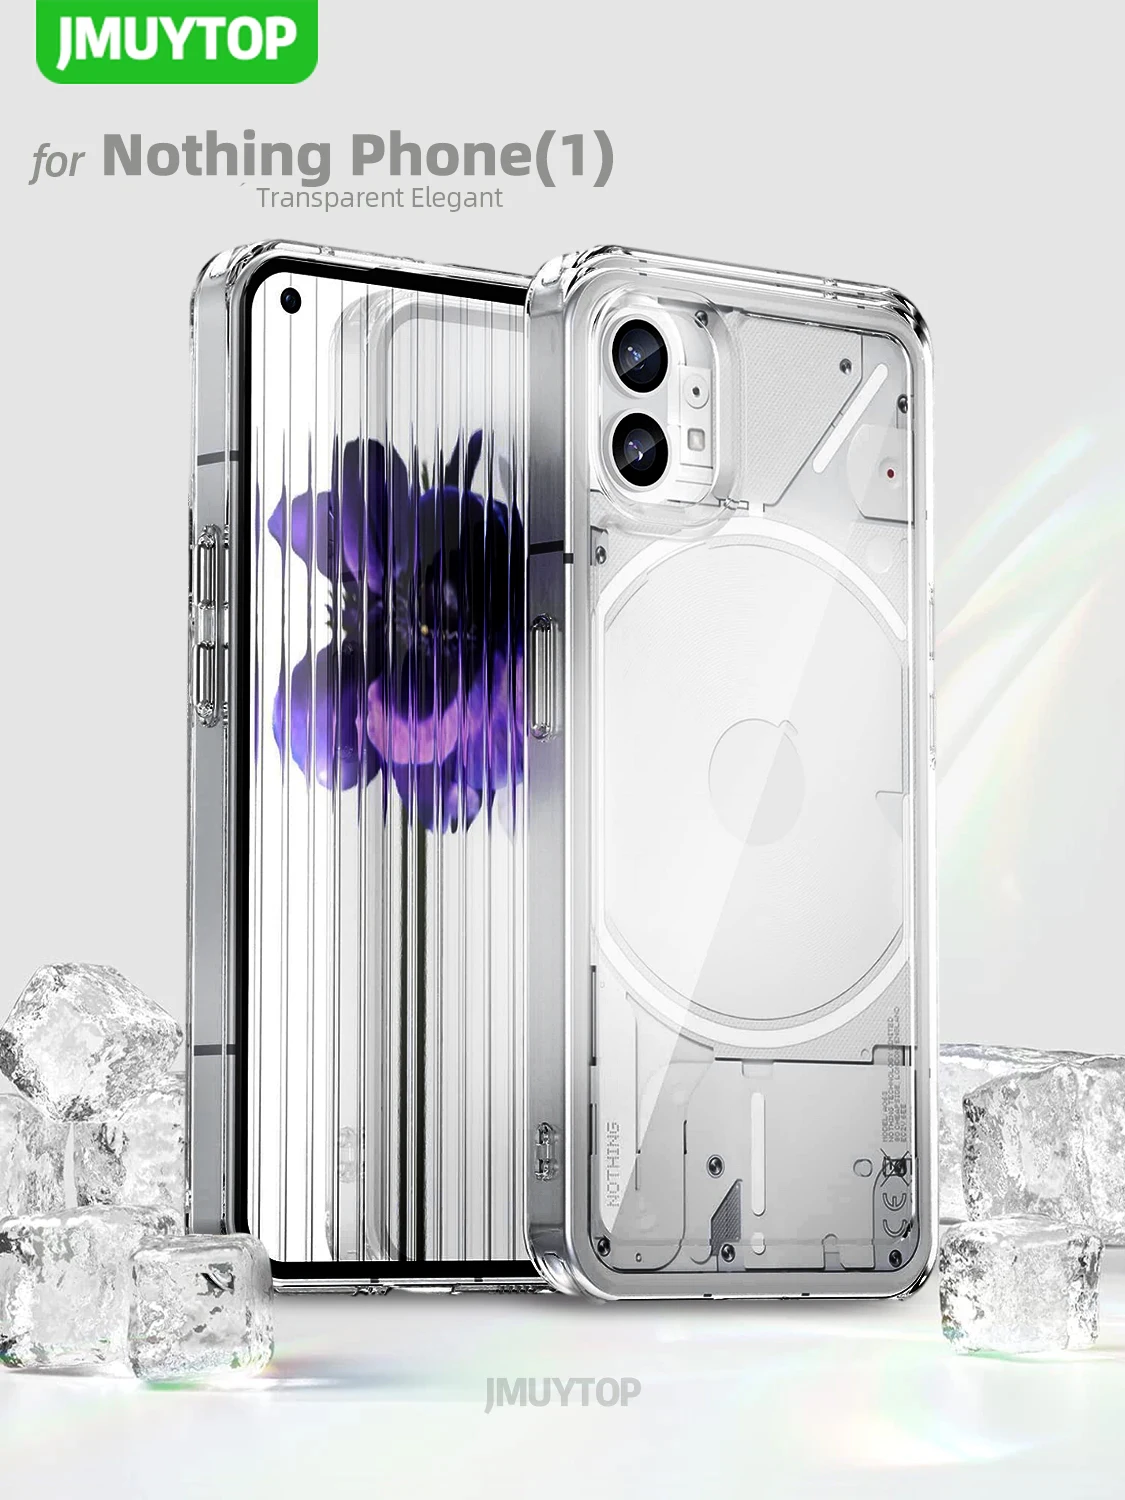 ONES iPhone XR HD Clear Case ·MIL Protection ·『 Shockproof Airbags 』『  Speaker Resonance 』〔 Screen & Lens Guard 〕〔 Anti-Slip 〕〔 Strap Hole  〕·Sturdy